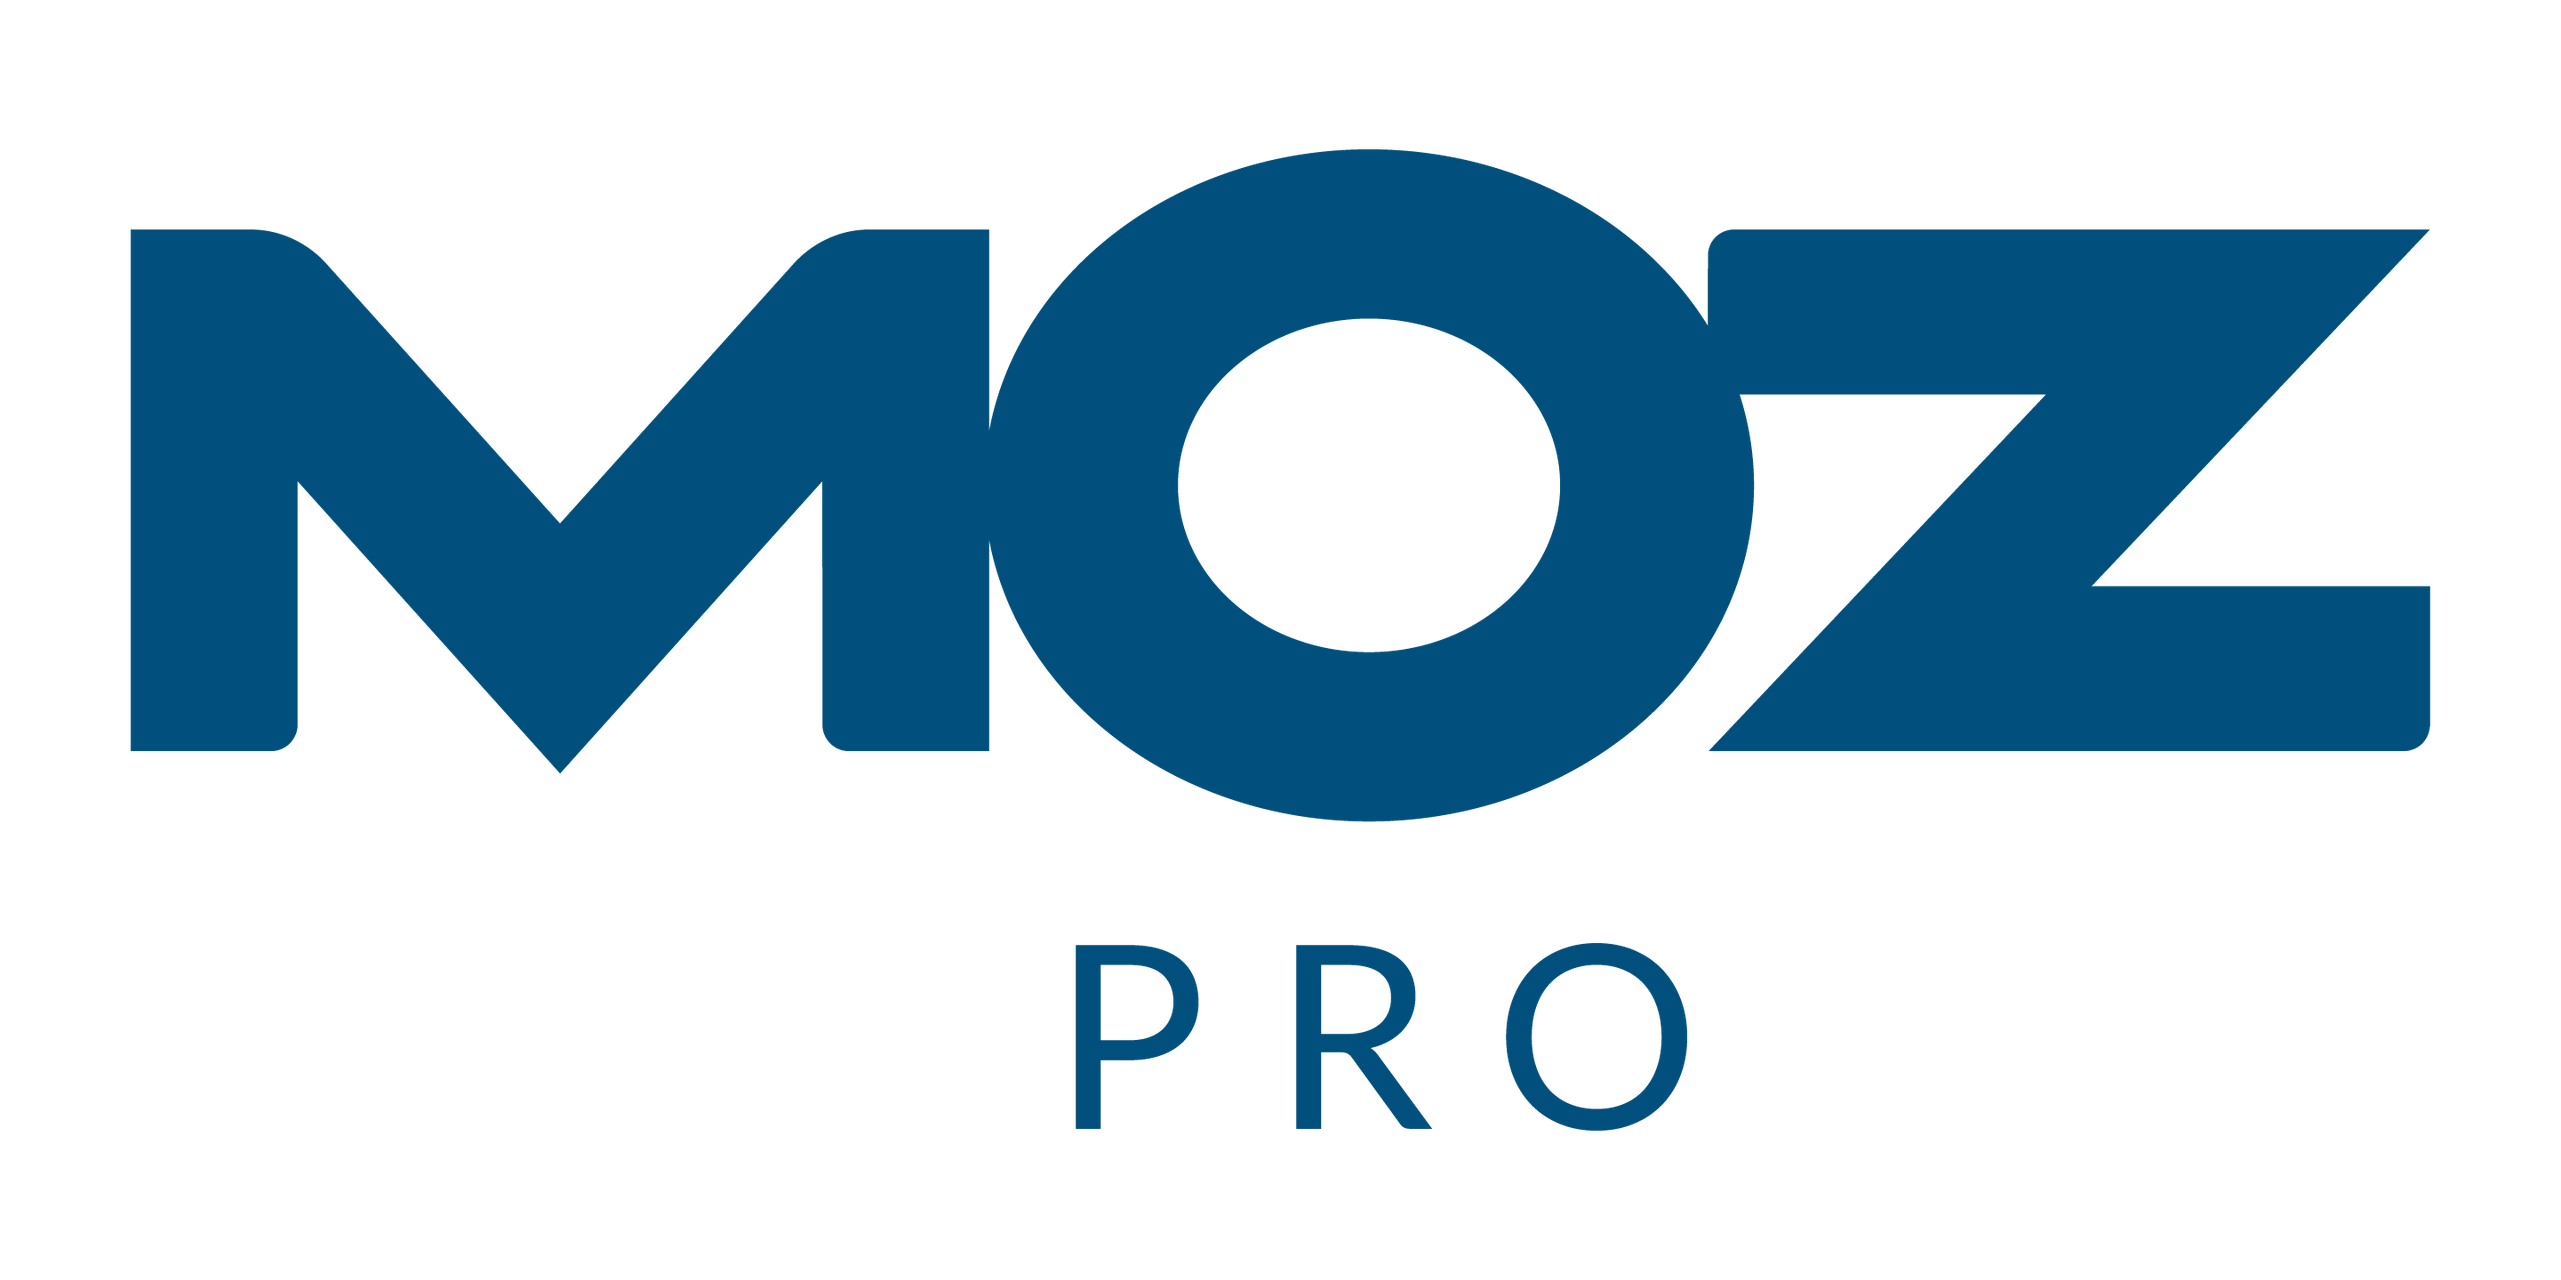 Moz Pro Cookies for Free1 Jan 2022 Daily Updated